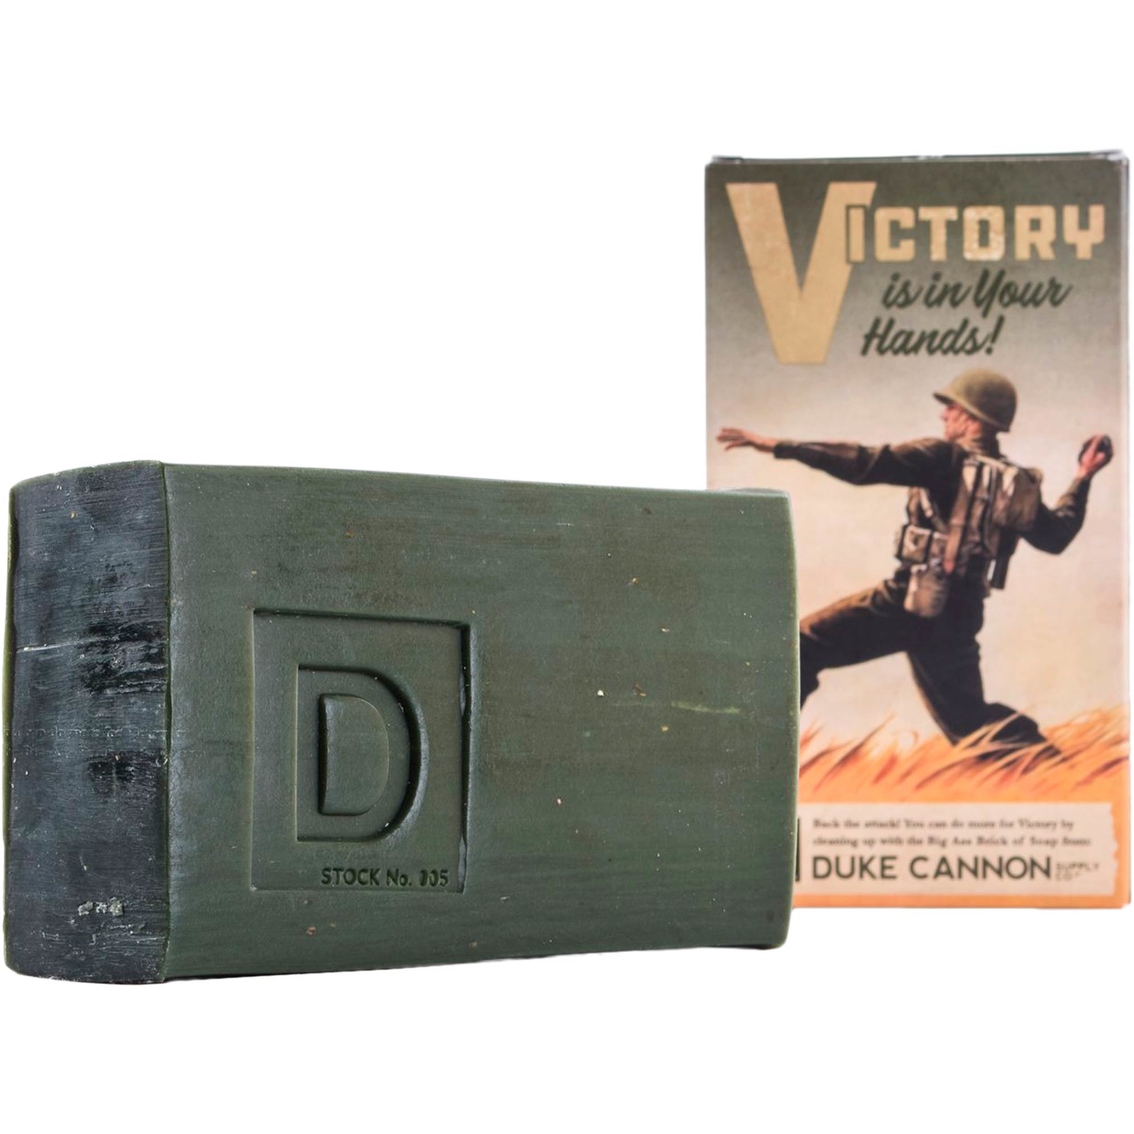 Duke Cannon Big Ass Brick of Soap, Victory - Image 2 of 3